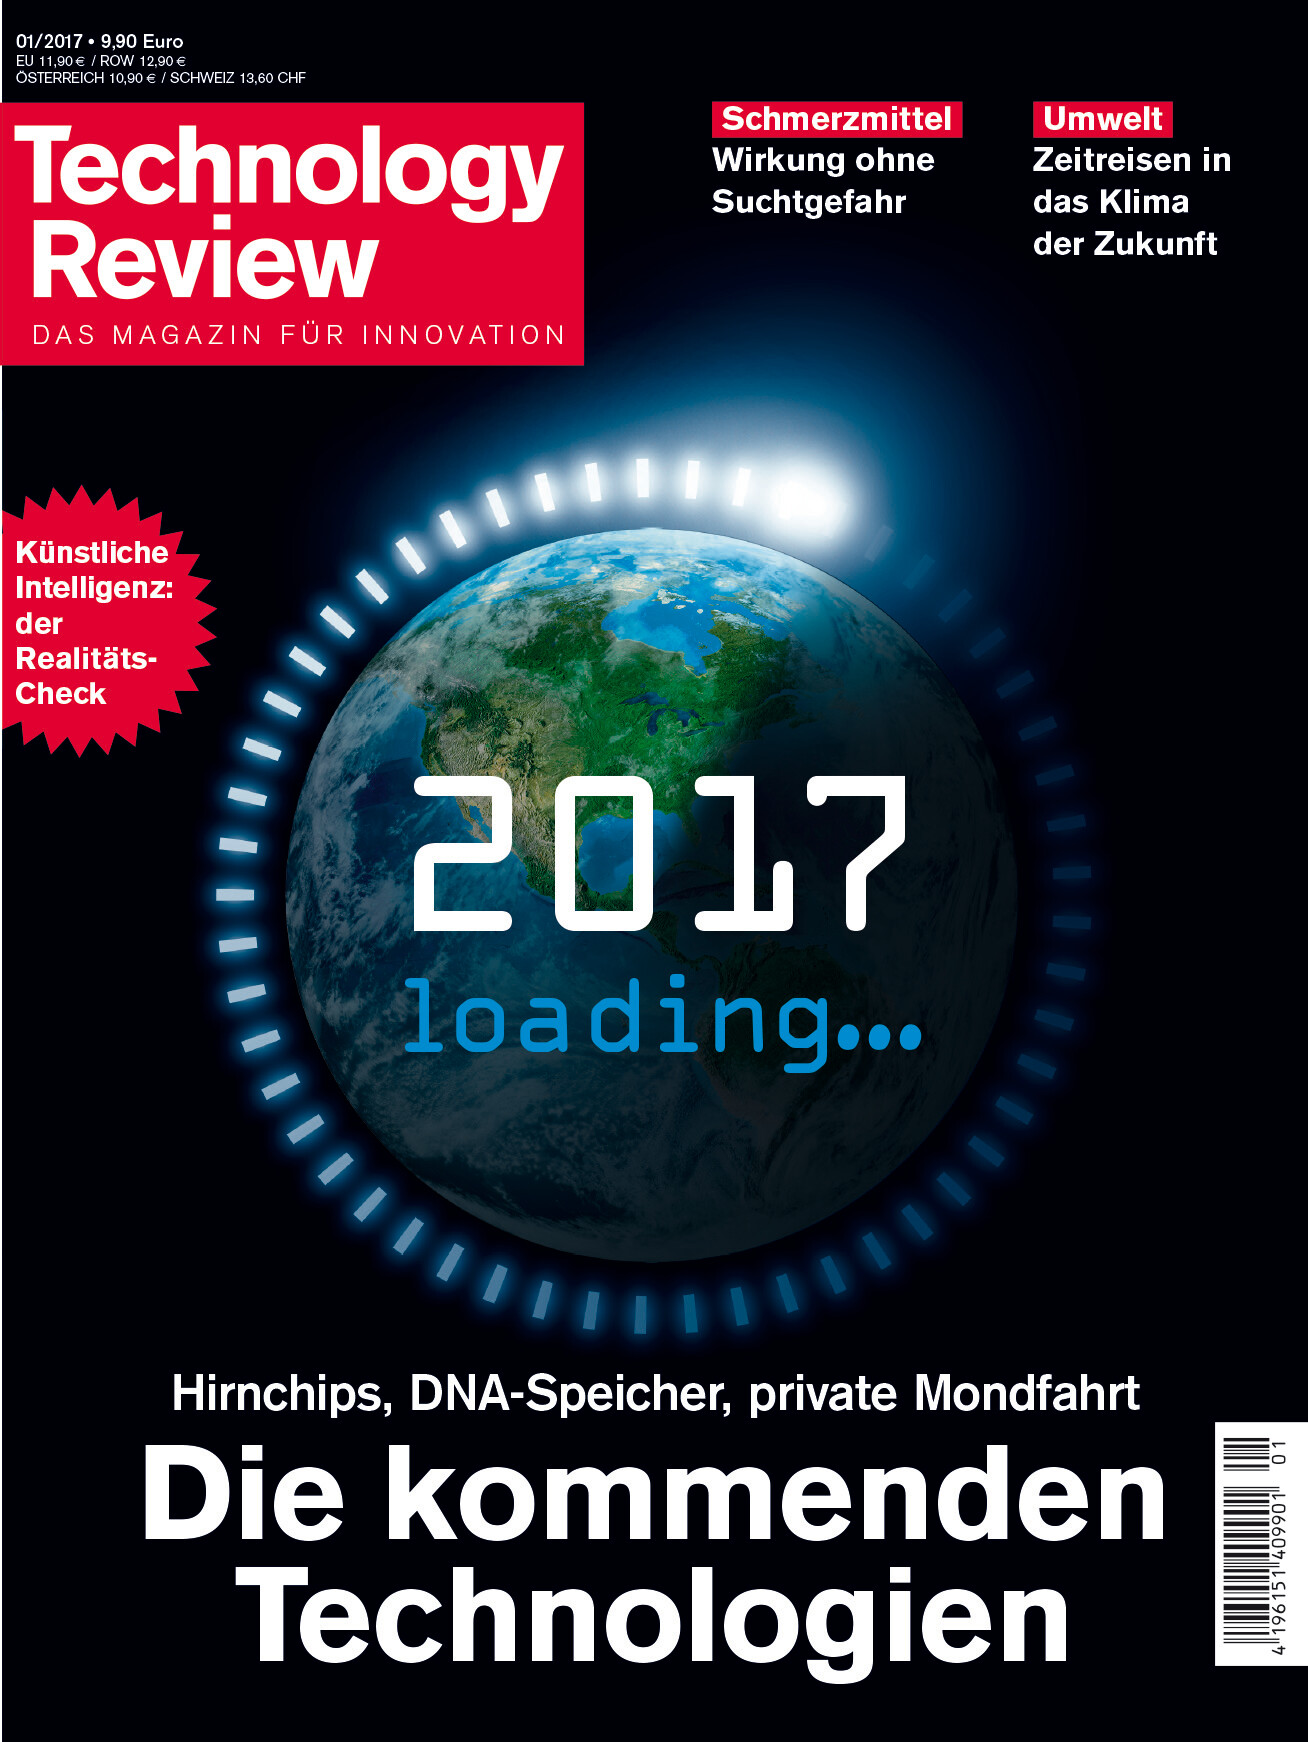 Technology Review 01/2017